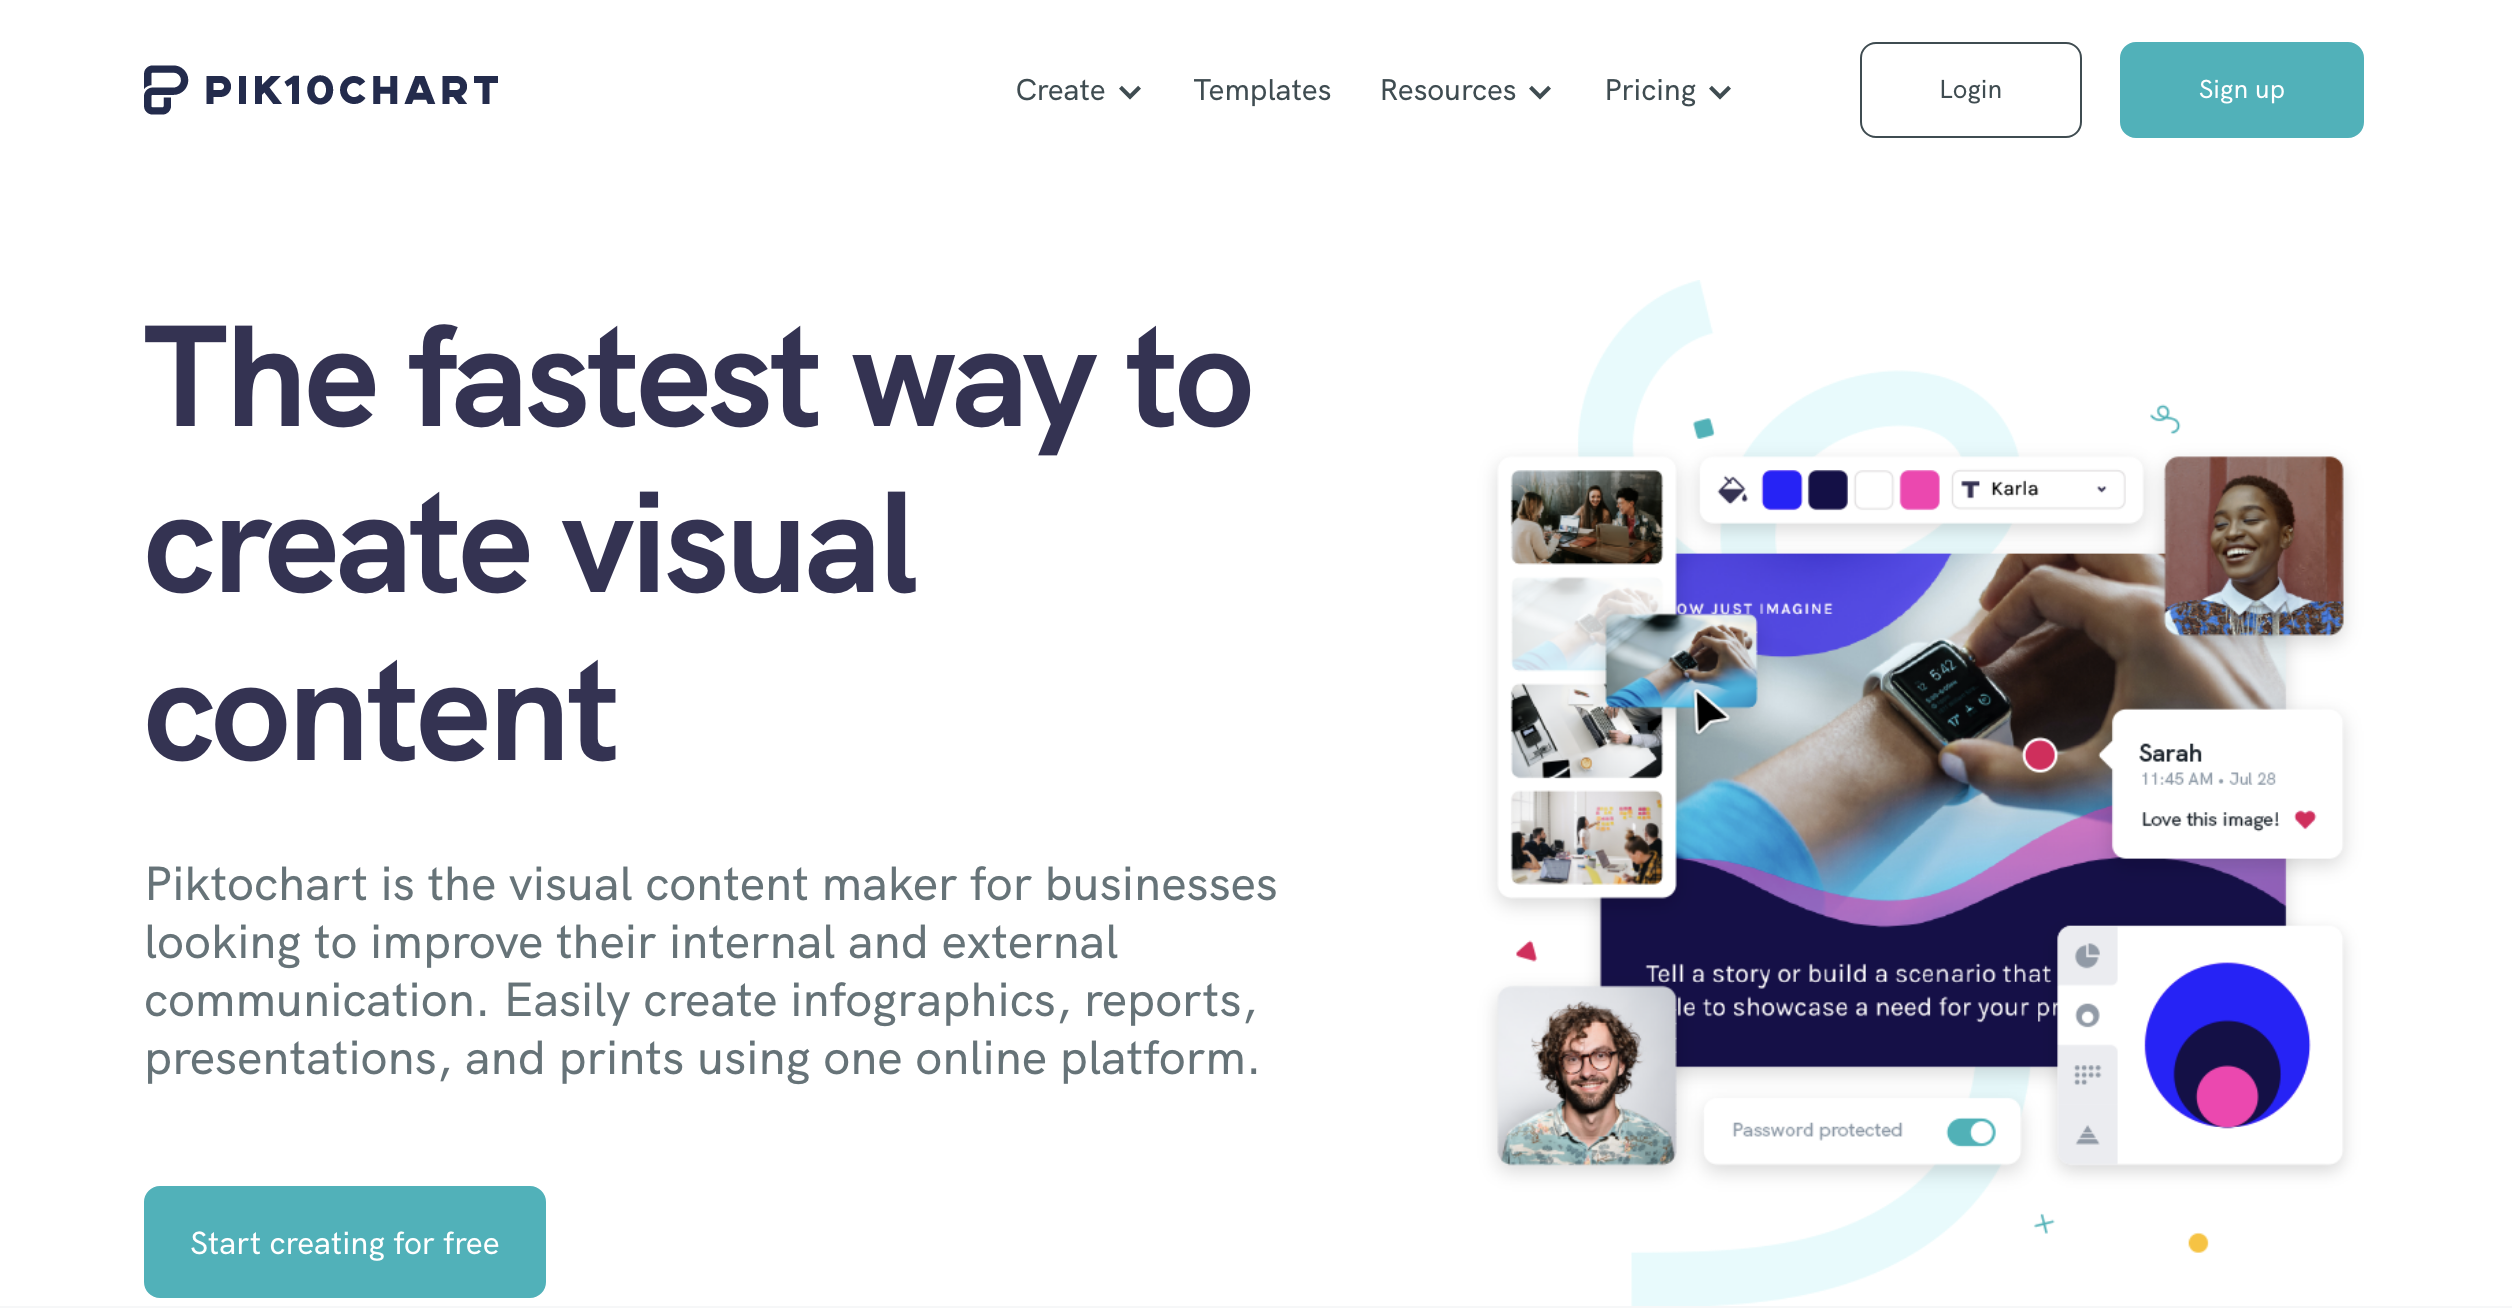 Want to create highly visual infographics? The templates and inspiration that you'll find on PiktoChart will have you looking like a pro in no time.